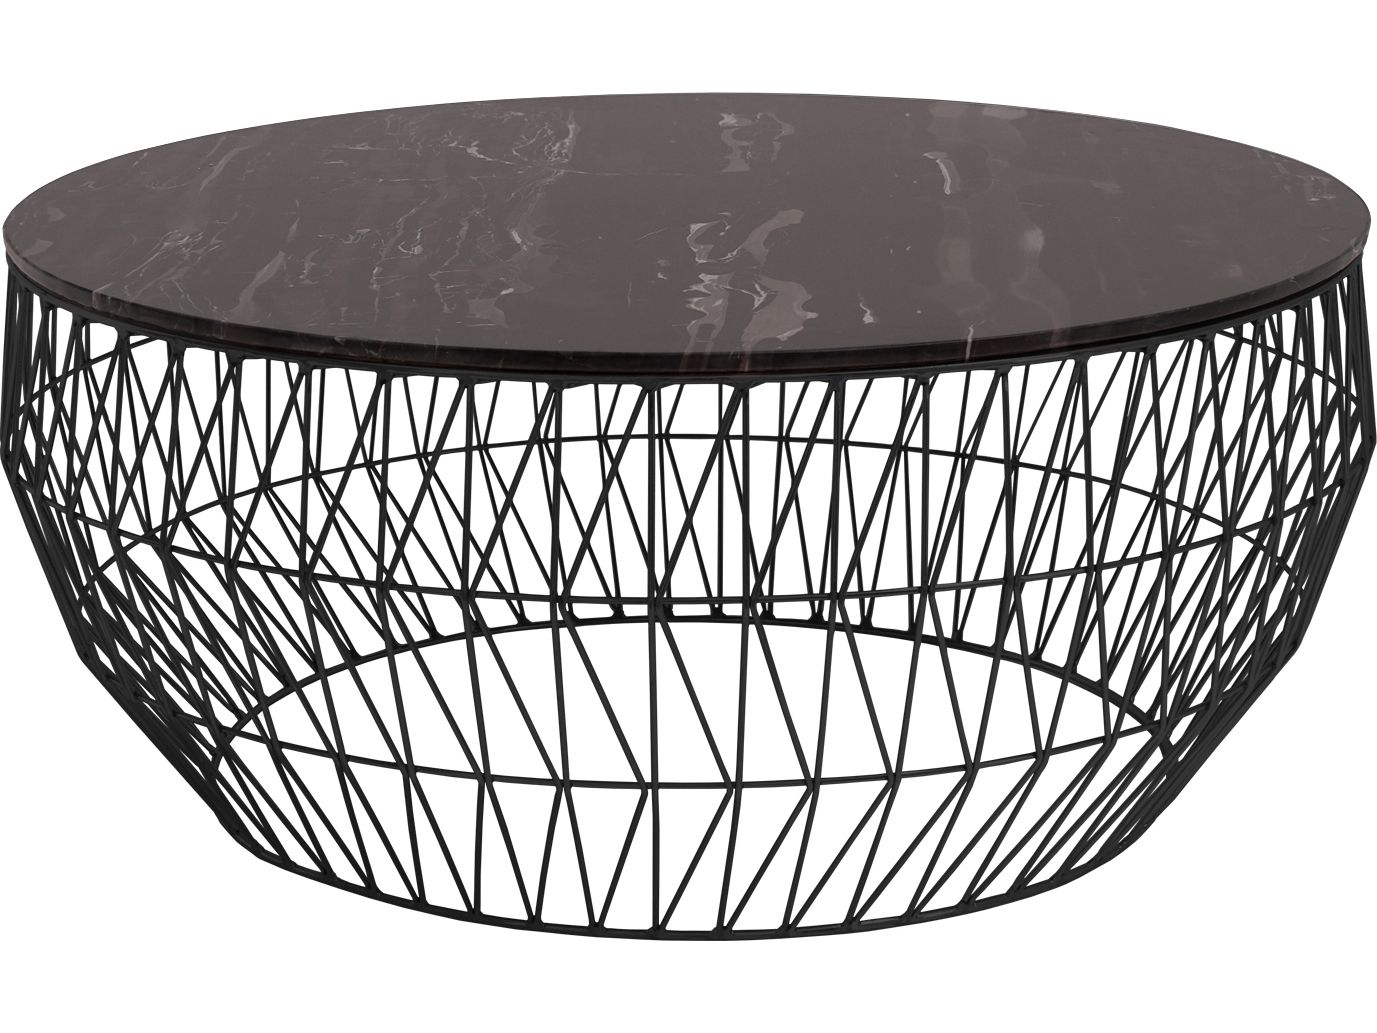 Outdoor Half Round Coffee Tables For Most Current Black Outdoor Coffee Table Uk : Portside Outdoor Round Concrete Coffee (View 11 of 15)